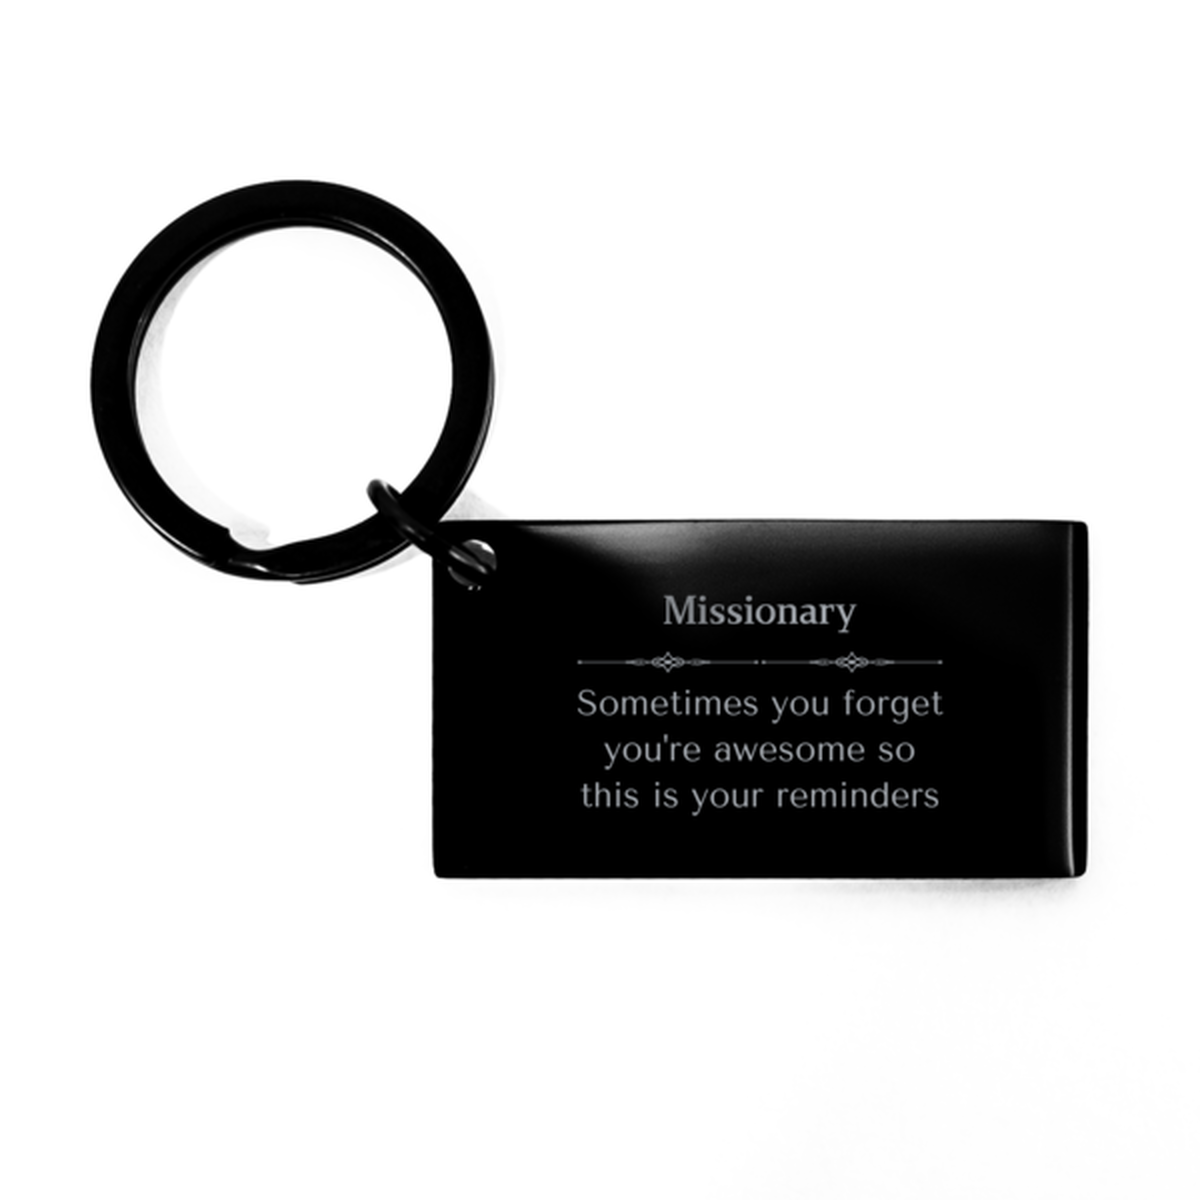 Sentimental Missionary Keychain, Orthopedic Surgeon Sometimes you forget you're awesome so this is your reminders, Graduation Christmas Birthday Gifts for Missionary, Men, Women, Coworkers